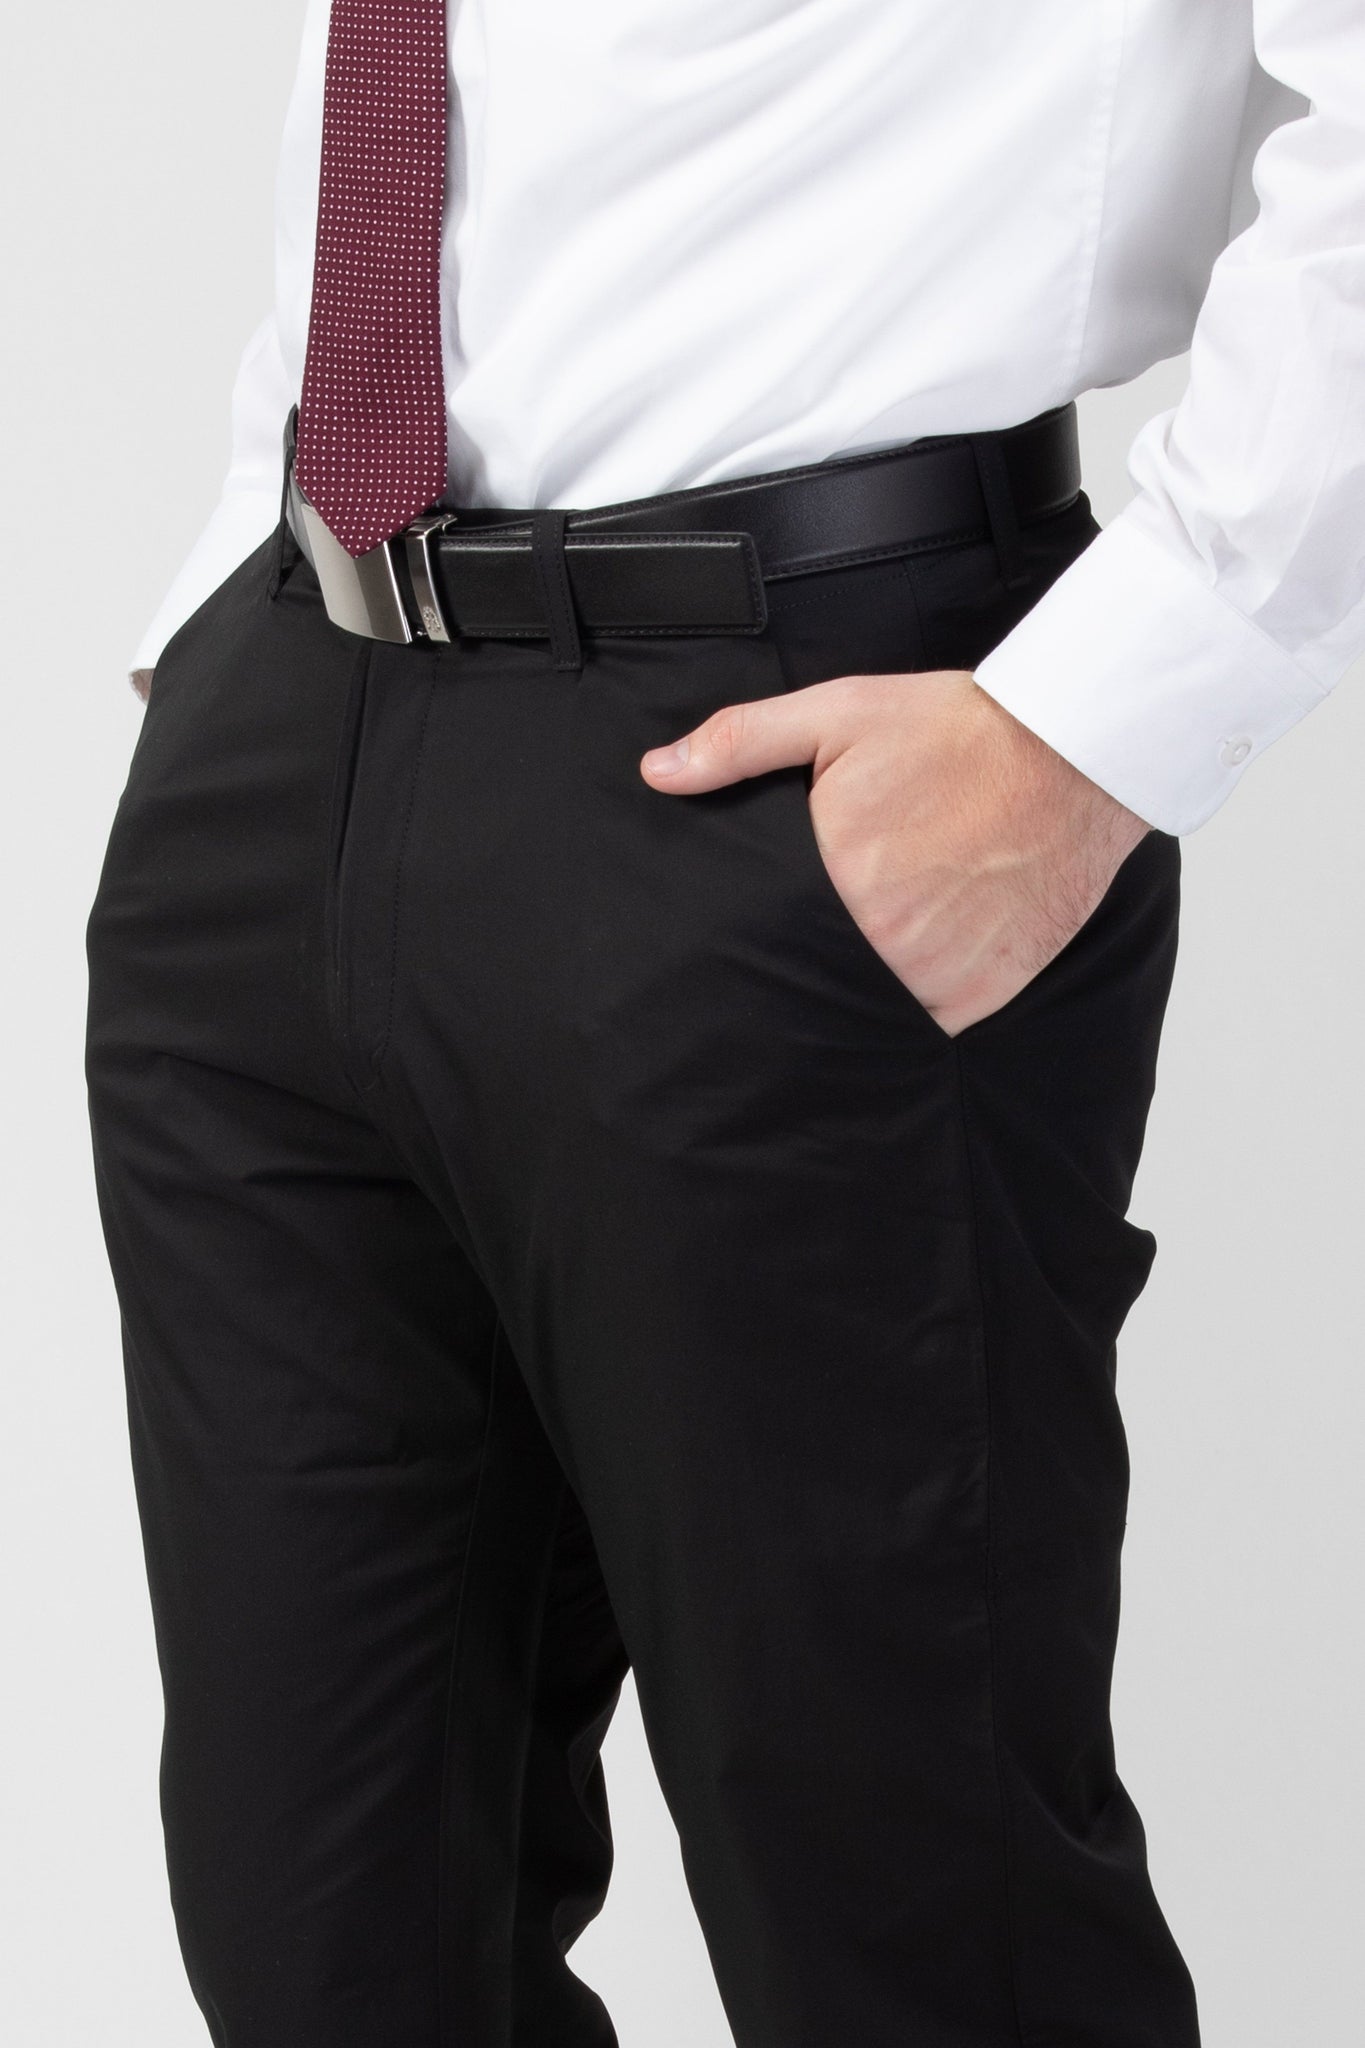 Discover more than 265 dress pants and suspenders latest